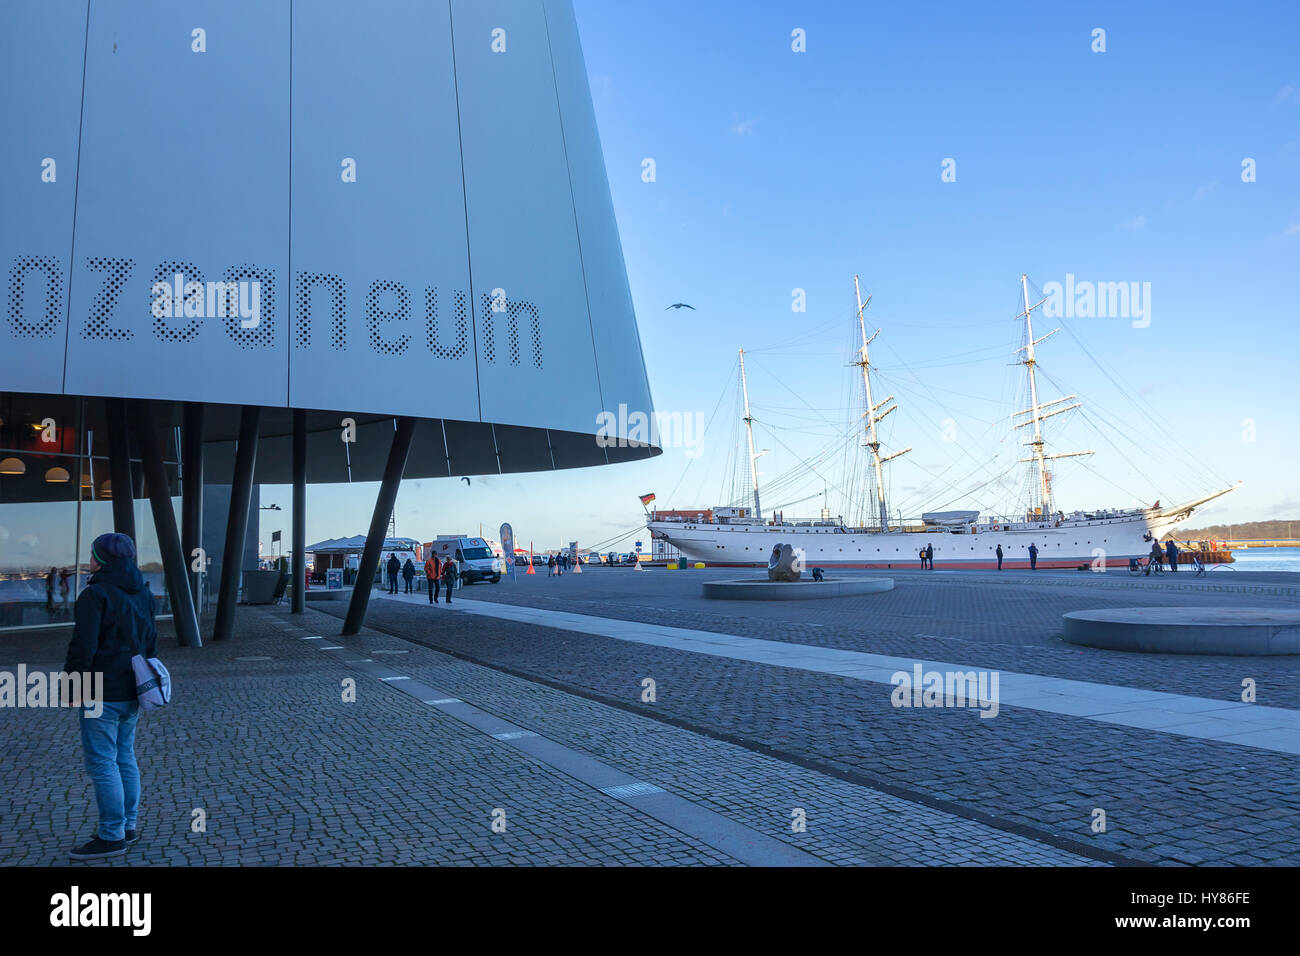 View of the Ozeaneum (Sea Museum) in the harbour of the Hanseatic City of Stralsund, Mecklenburg-Pomerania, Germany. Stock Photo